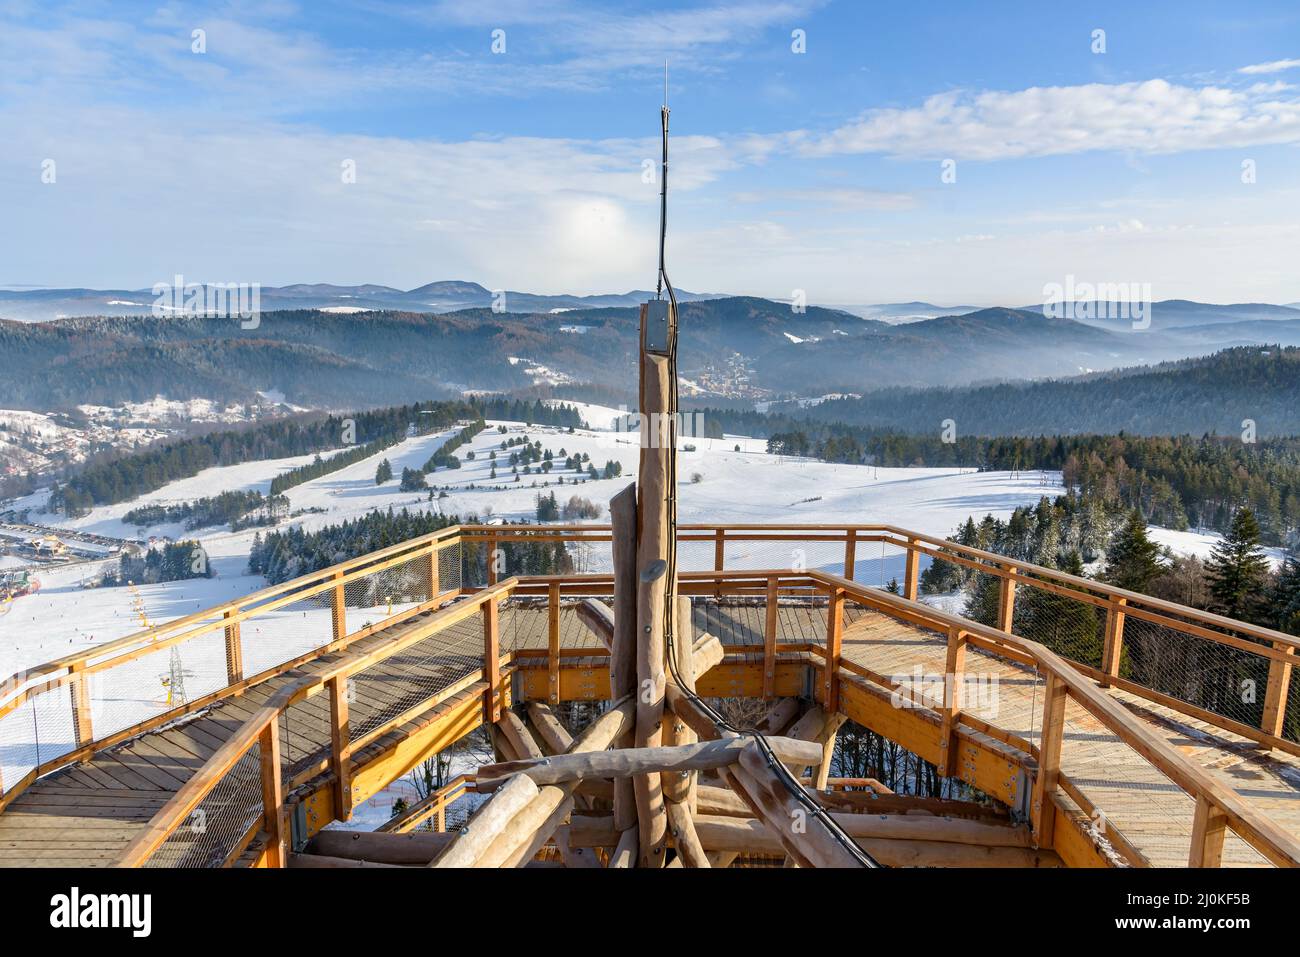 Beskid mountain winter landscape seen from the wooden path of the treetop observation tower at Slotwiny Arena ski station in Krynica Zdroj, Poland Stock Photo